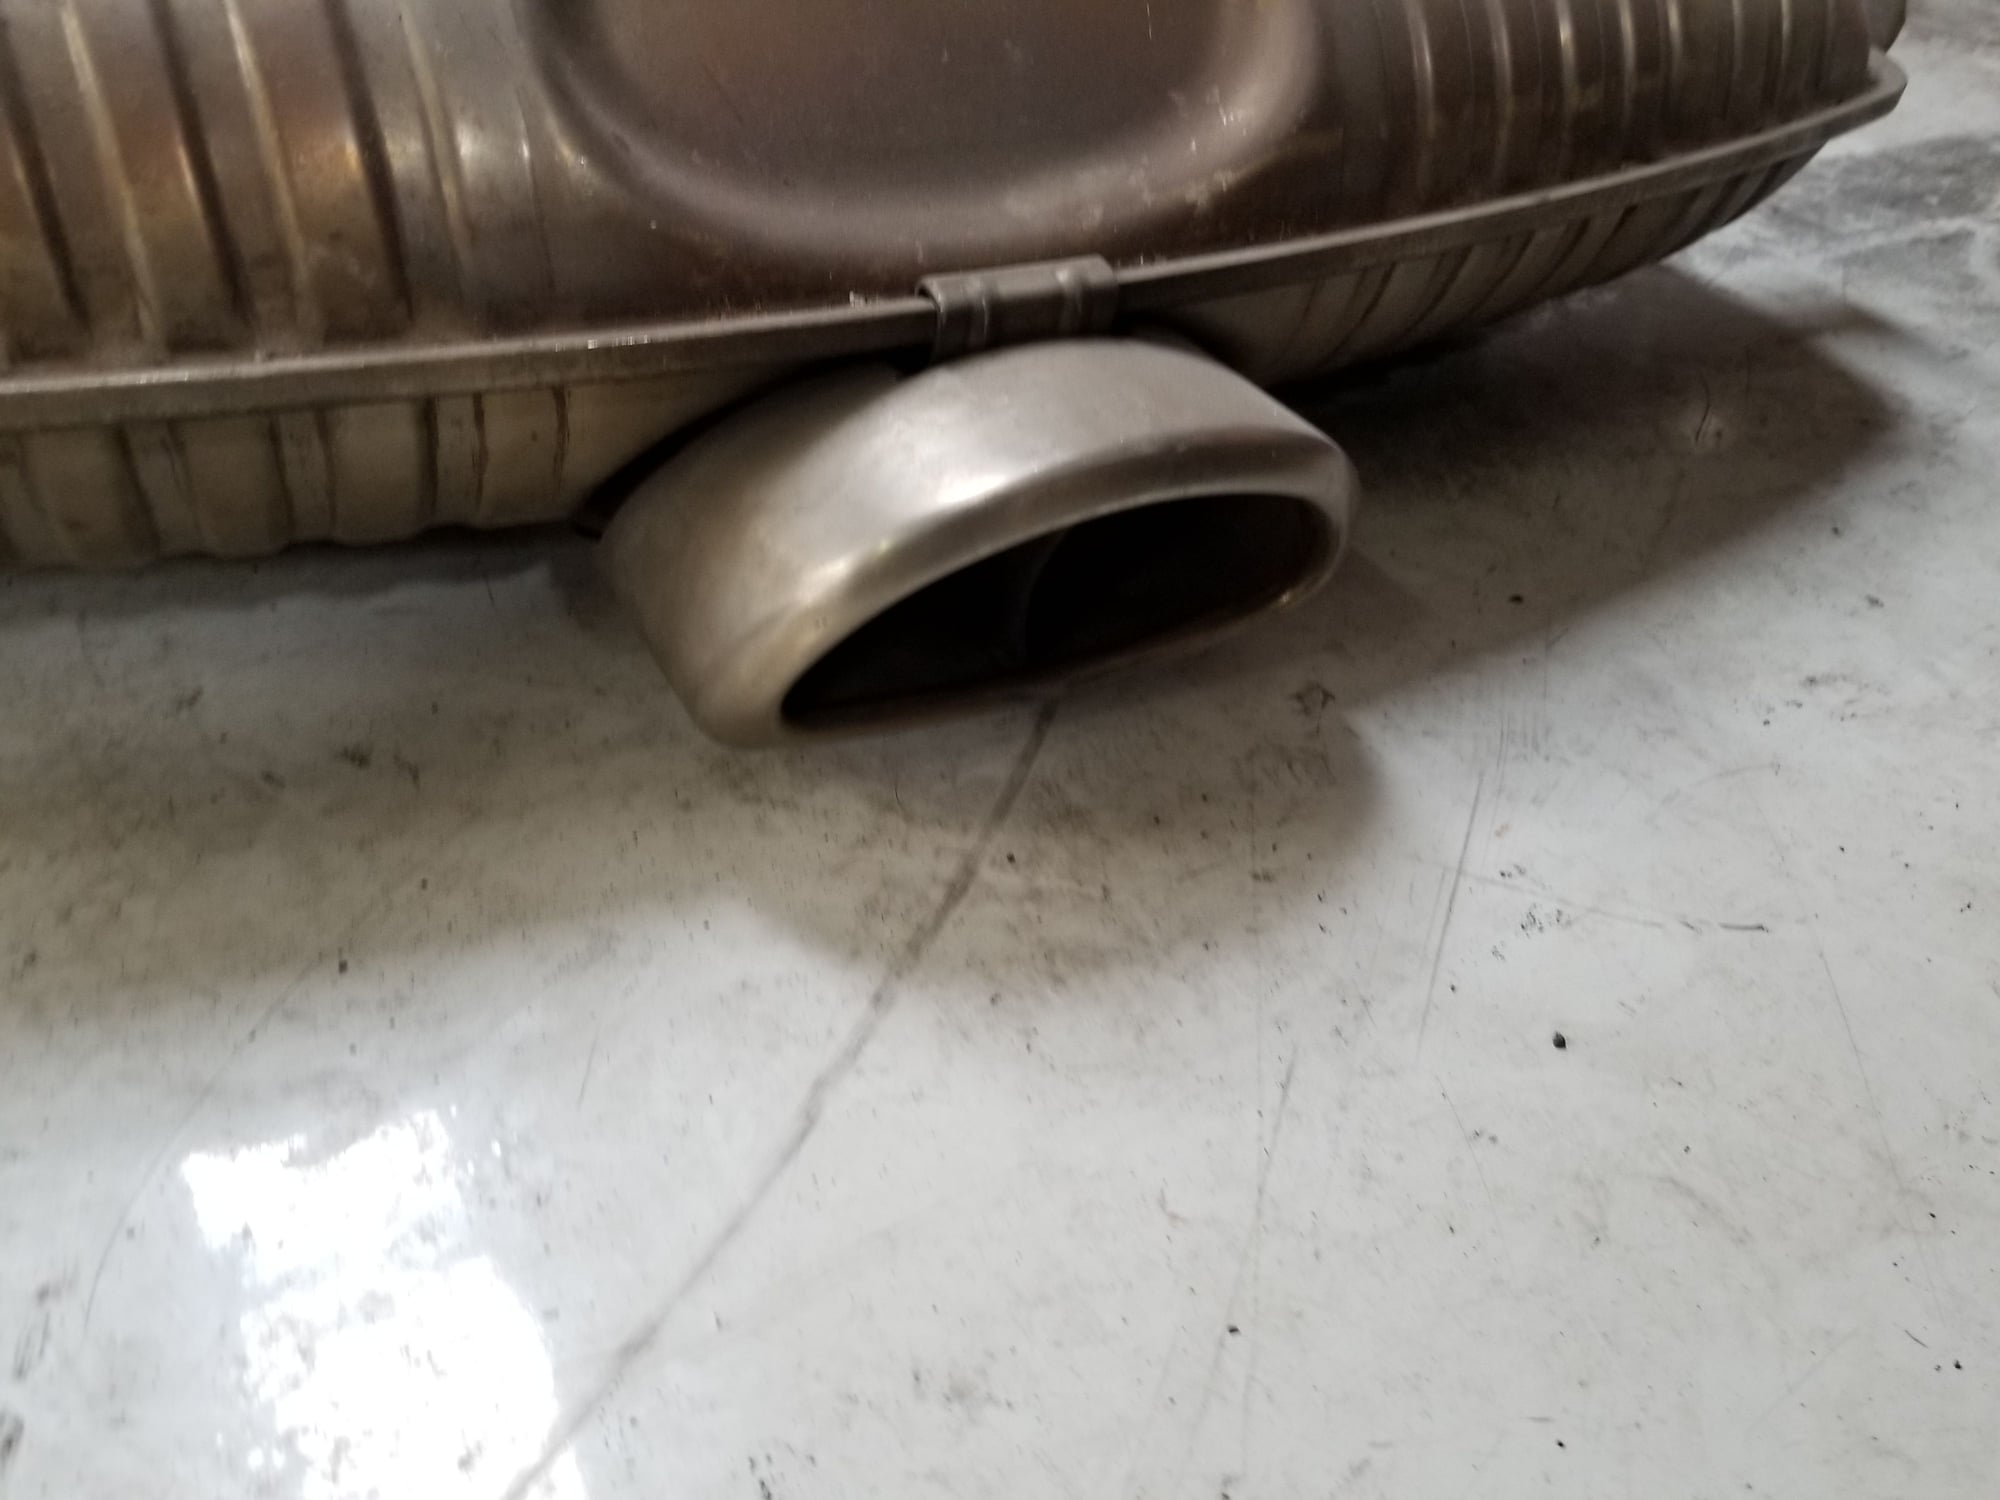 Engine - Exhaust - Shop clean up, various exhaust parts - Used - Houston, TX 77008, United States